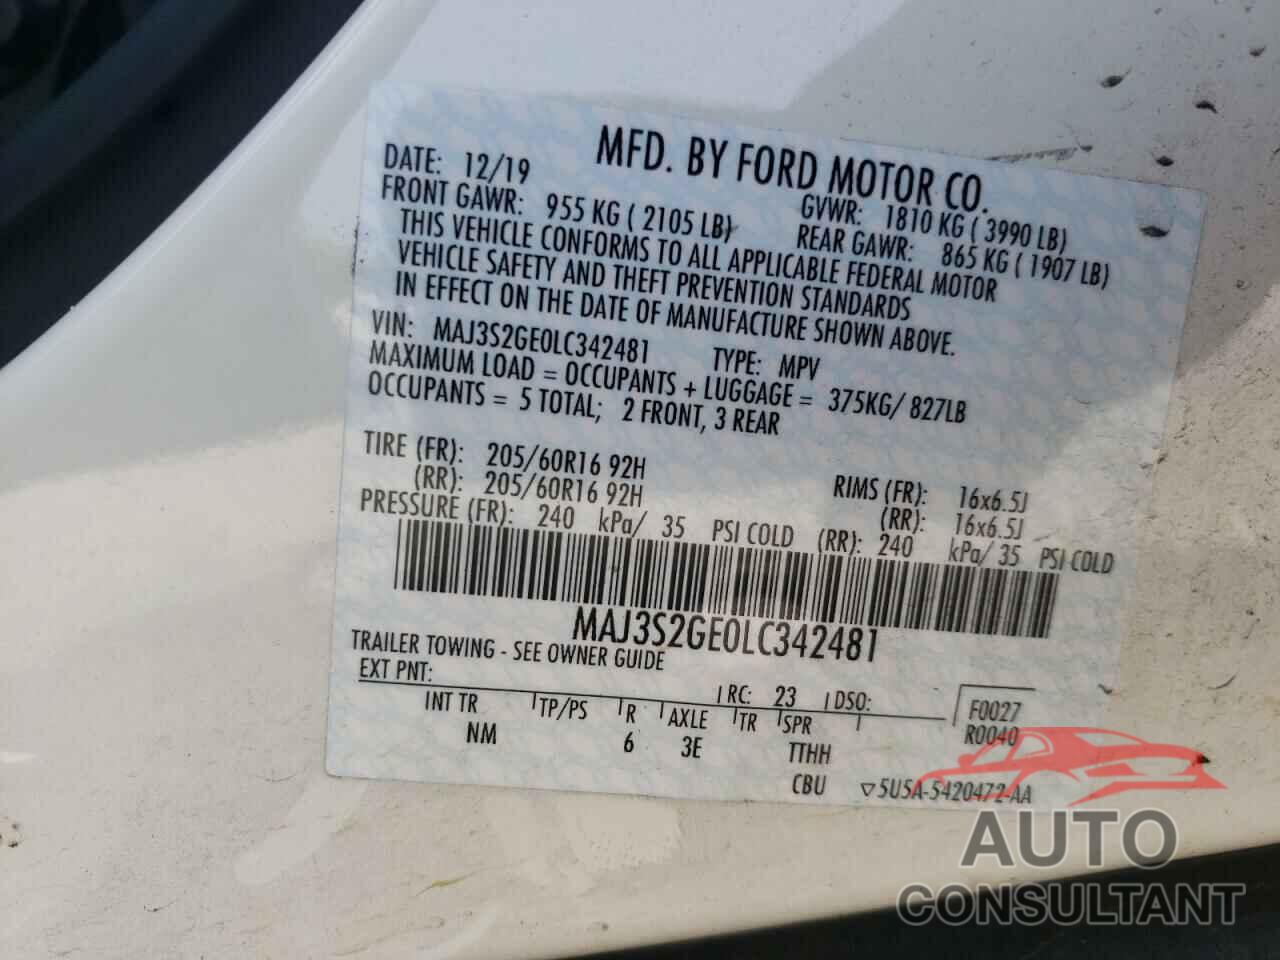 FORD ALL OTHER 2020 - MAJ3S2GE0LC342481